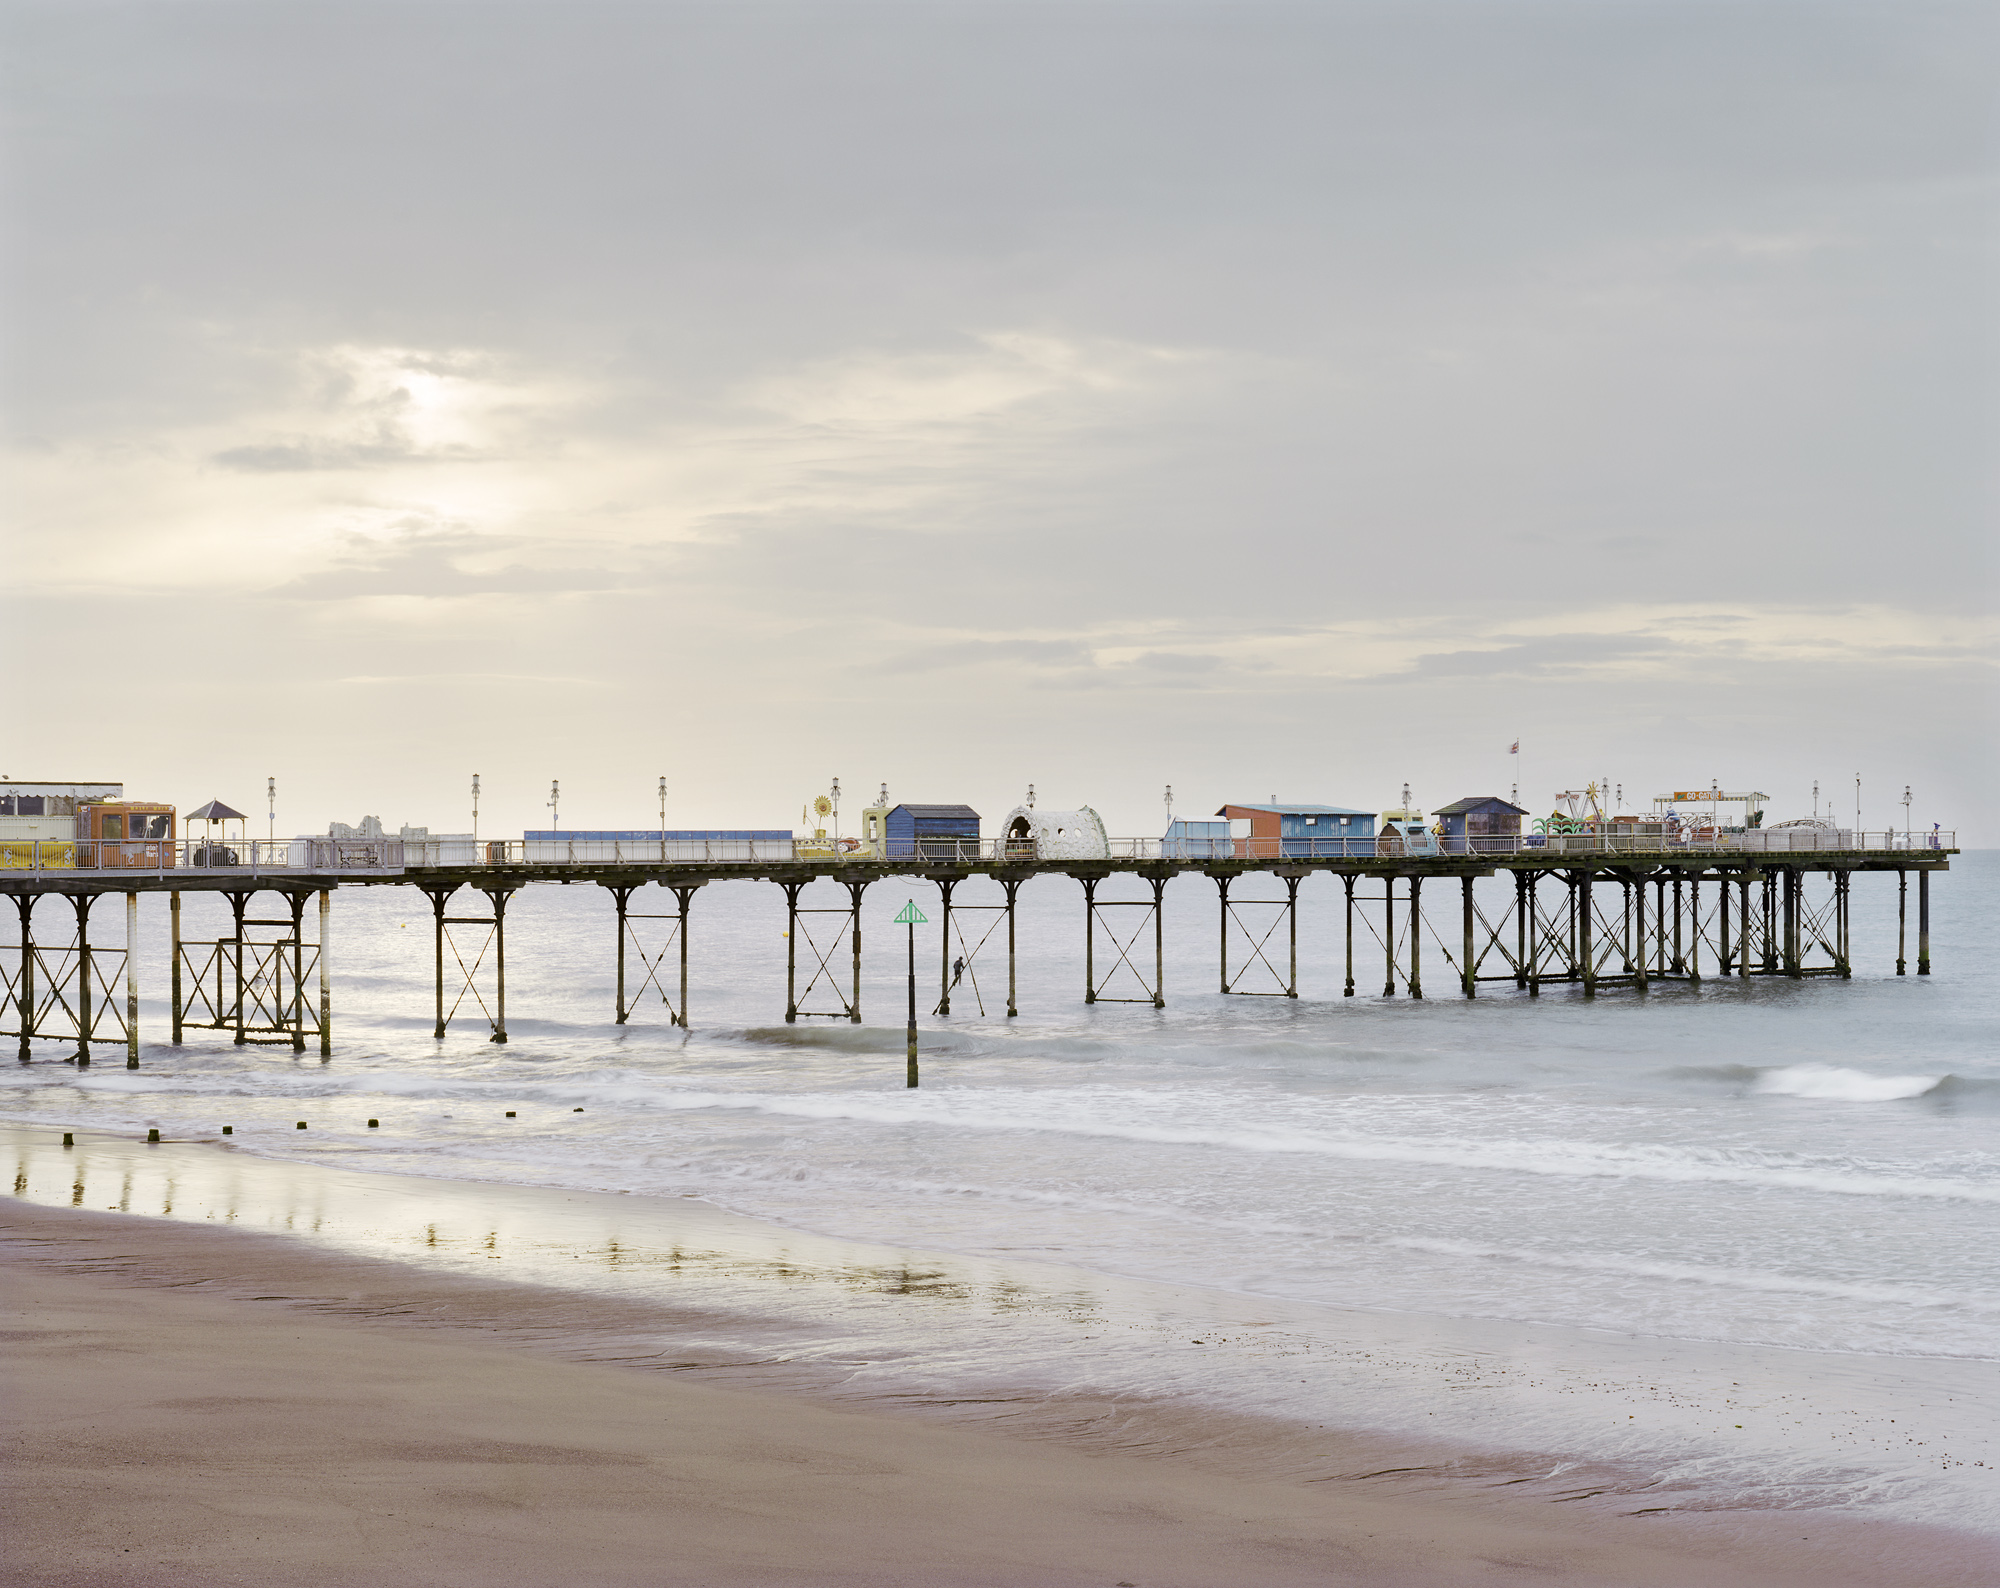 Remembering The Rusted, Crumbling Piers Of Seaside Britain